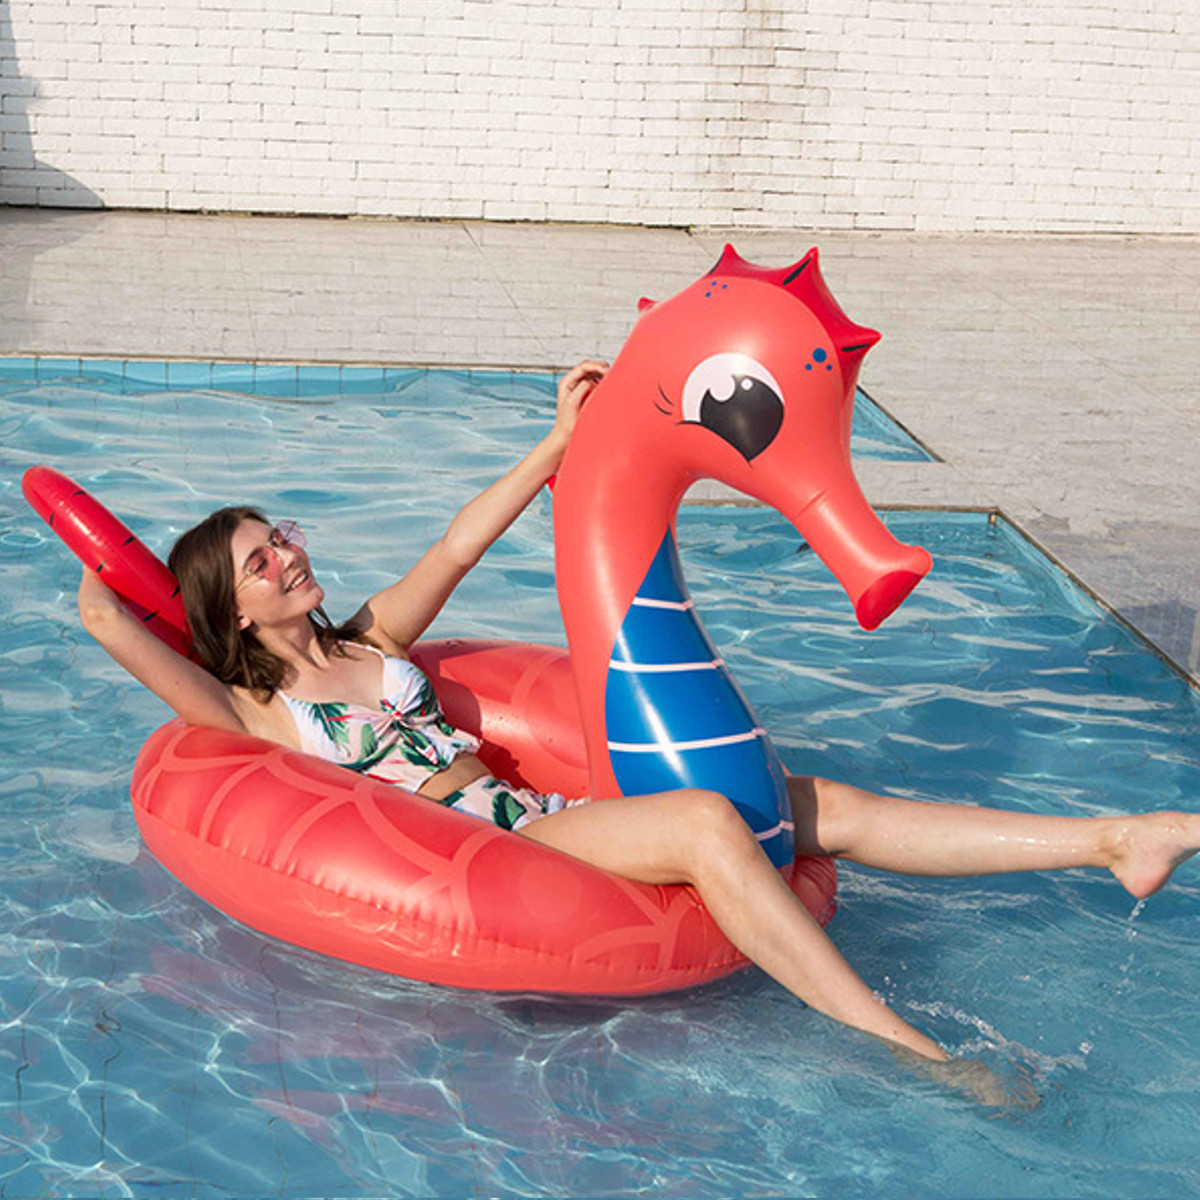 Large-Seahorse-Inflatable-Hippocampus-Giant-Swimming-Pool-Ring-Floats-Bed-Water-Pool-Raft-Camping-Be-1723619-12